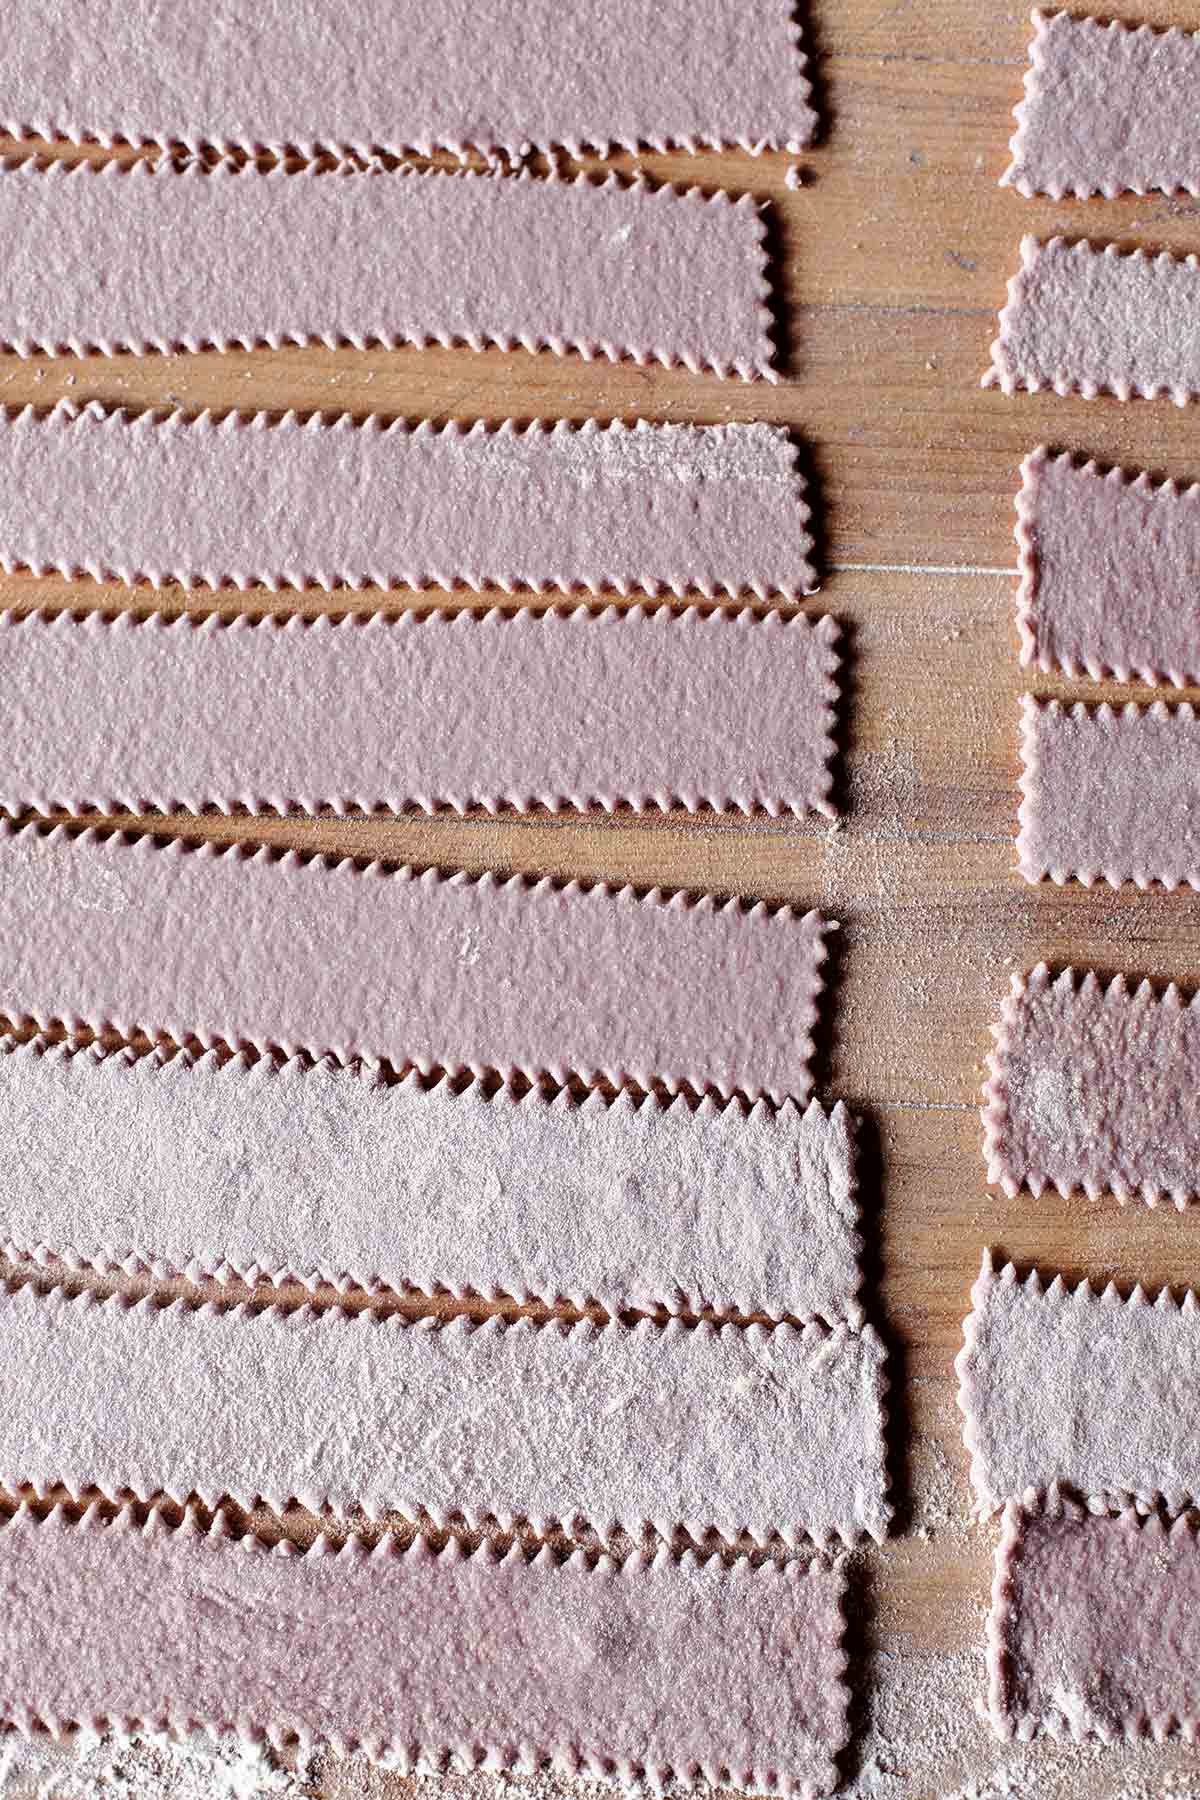 Strips of homemade red wine pasta on a wooden surface.